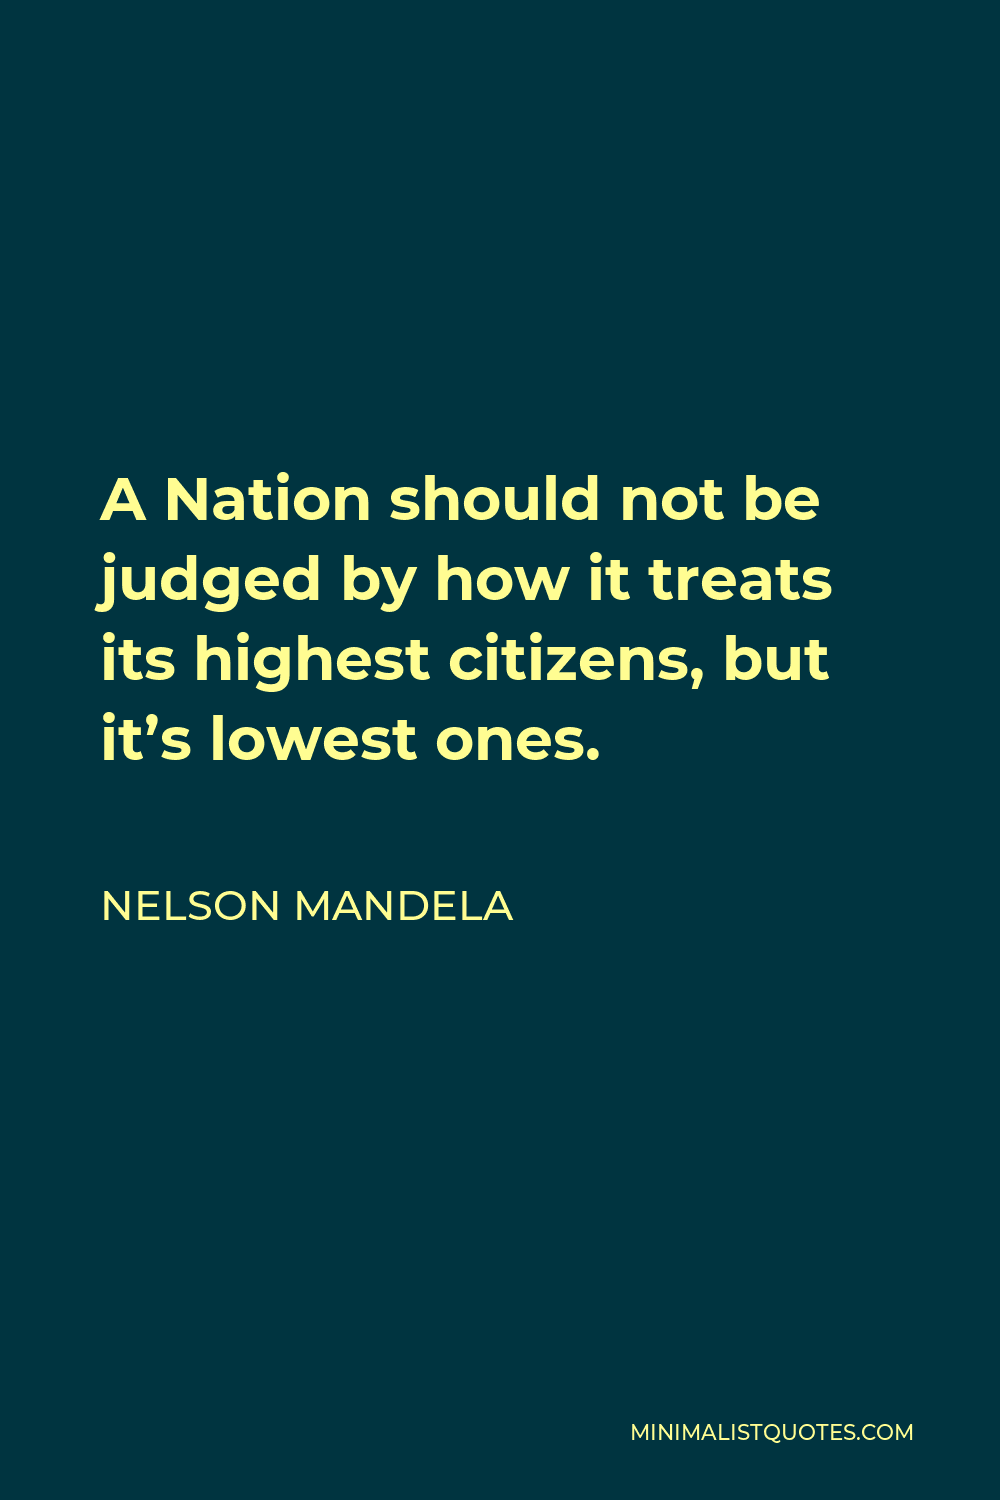 Nelson Mandela Quote - A Nation should not be judged by how it treats its highest citizens, but it’s lowest ones.